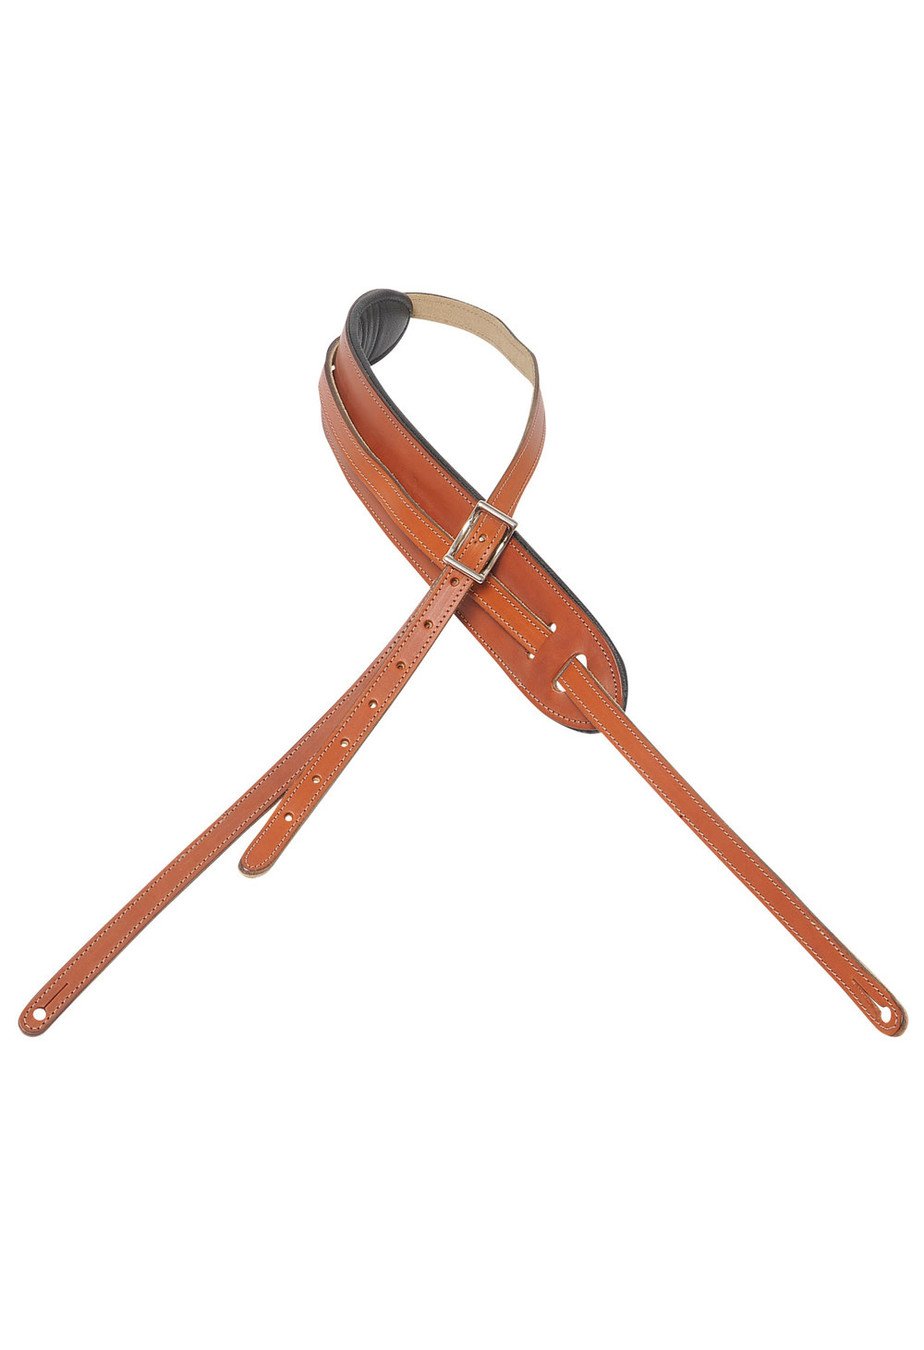 Levy's Levy's Leather Rockabilly Guitar Strap- Tan